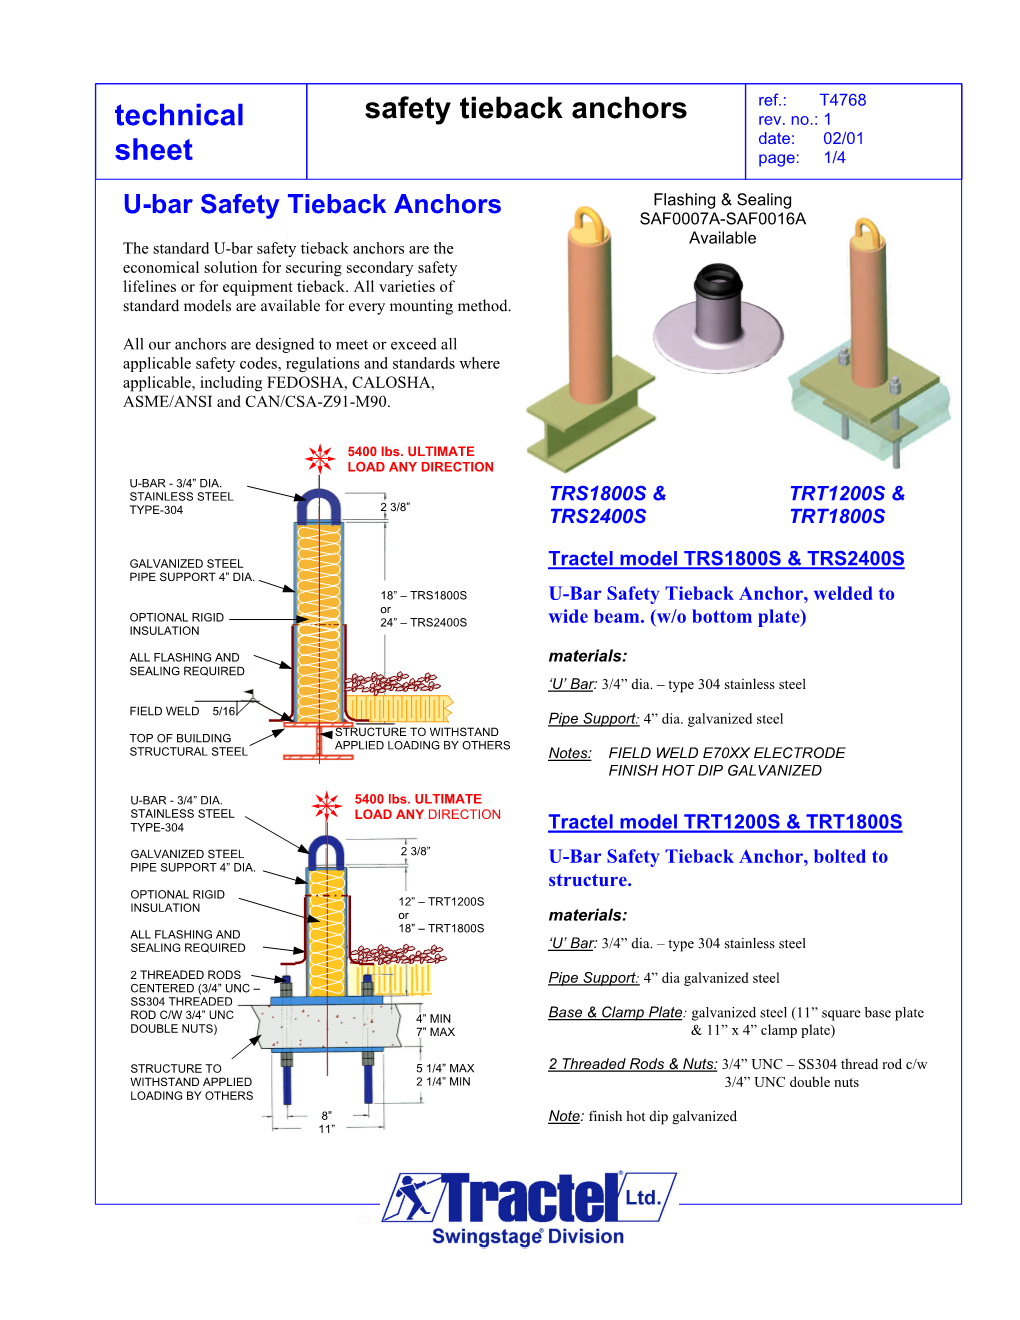 Technical Sheet Safety Tieback Anchors